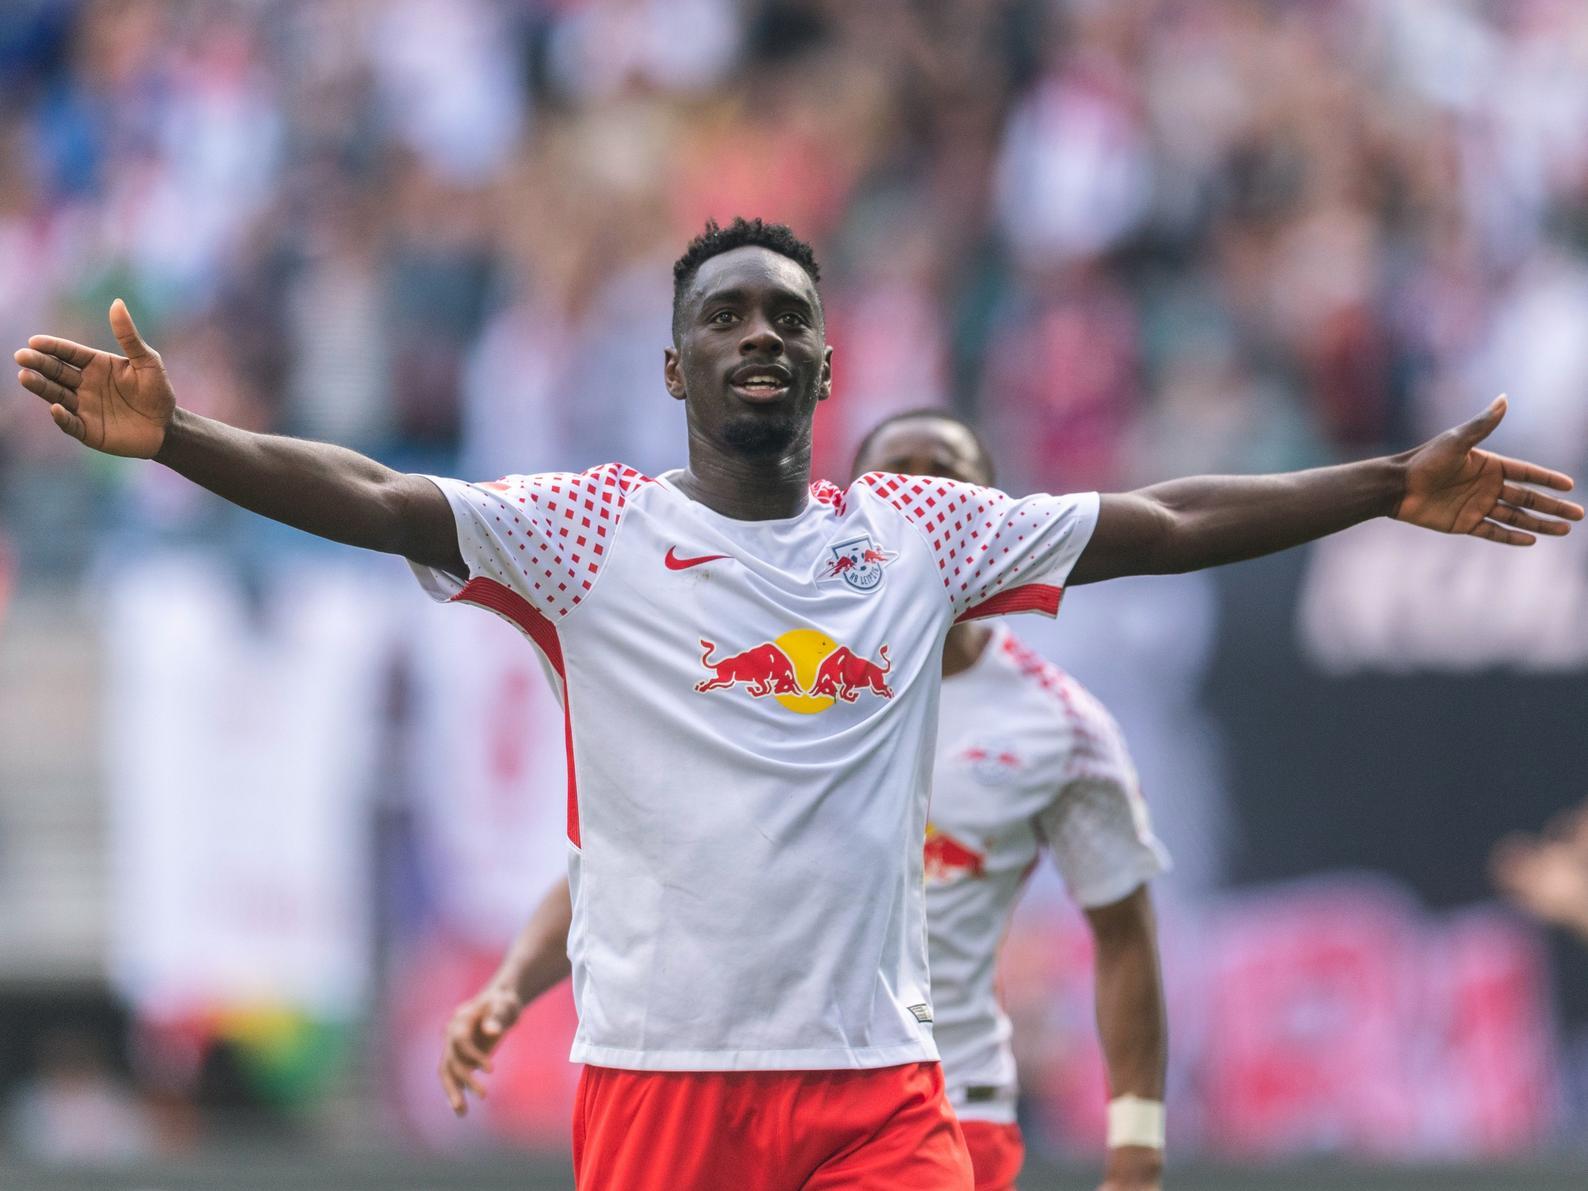 RB Leipzig's promising striker Jean-Kevin Augustin is said to have had his loan spell cancelled with Monaco cancelled, ahead of a potential medical with Leeds United early this week. (The Athletic)